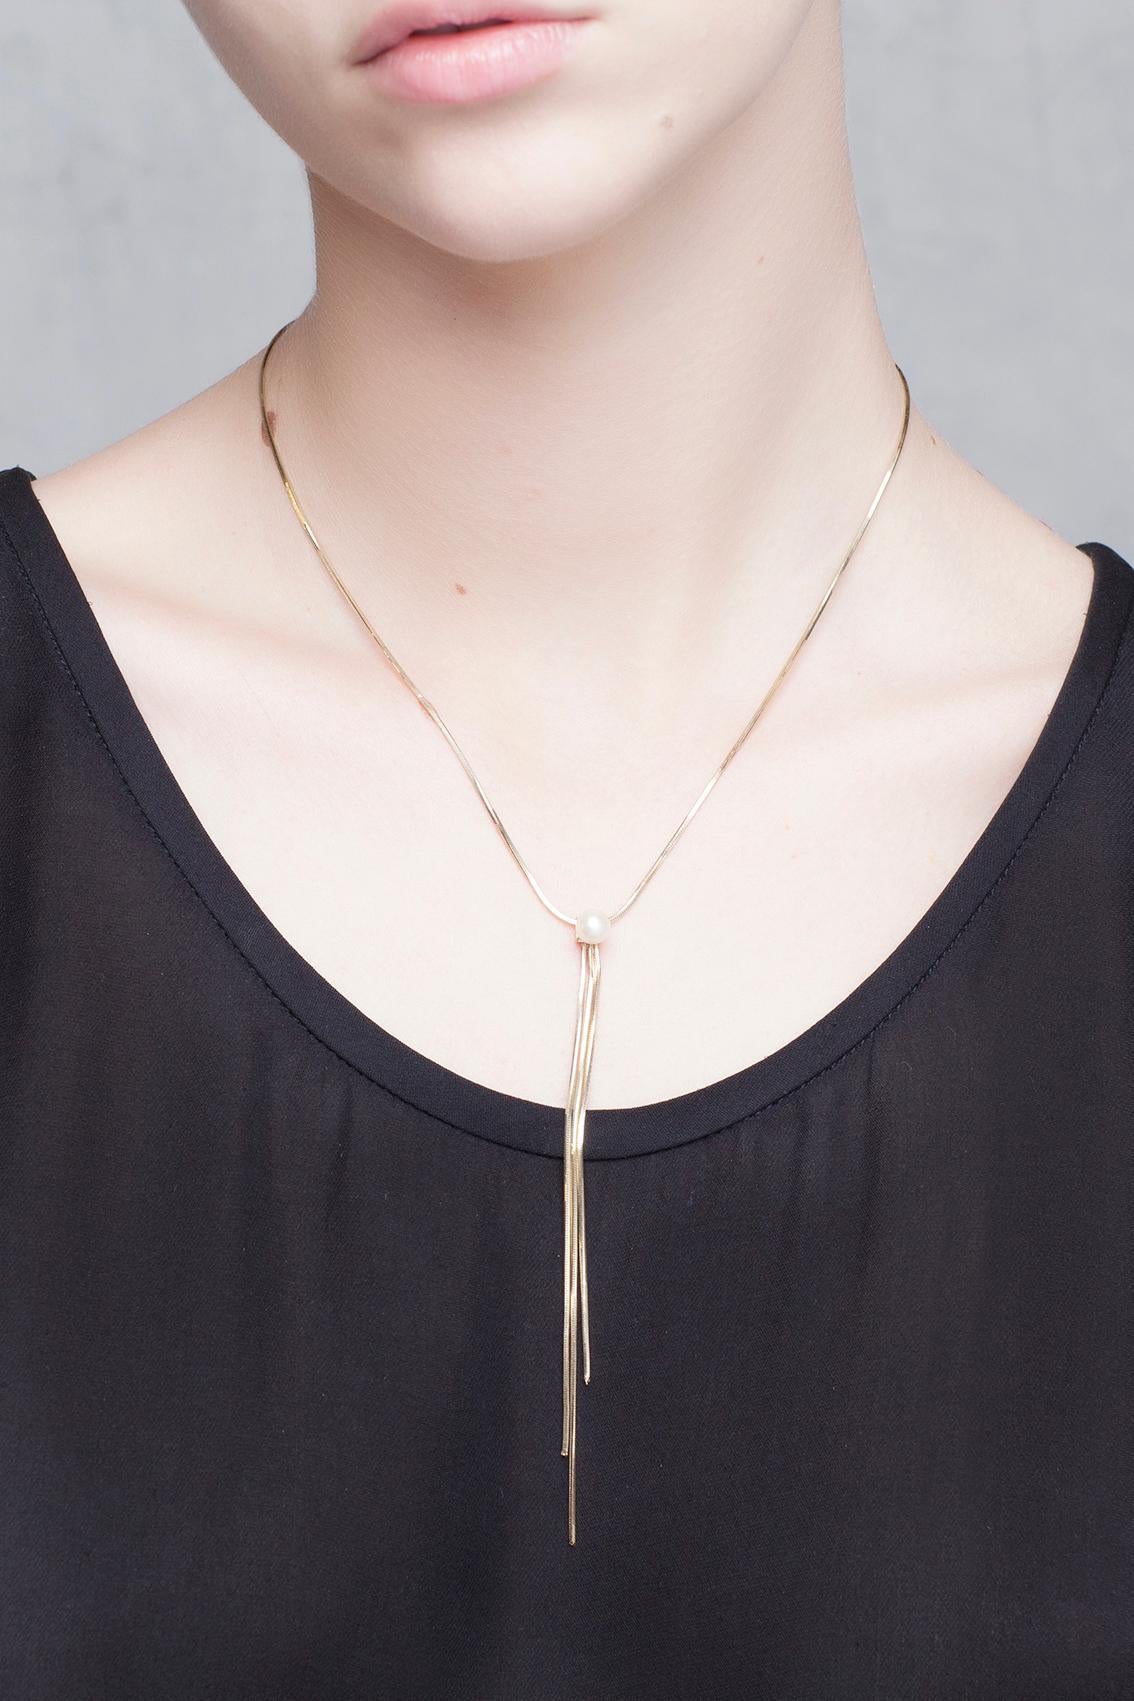 Balancing its design between minimalism and avant-garde, Iosselliani captures the essence of elegance with this 9 Karat yellow gold necklace embellished with a central tassel made of 9 Karat gold threads adorned by a central freshwater pearl. Pearls